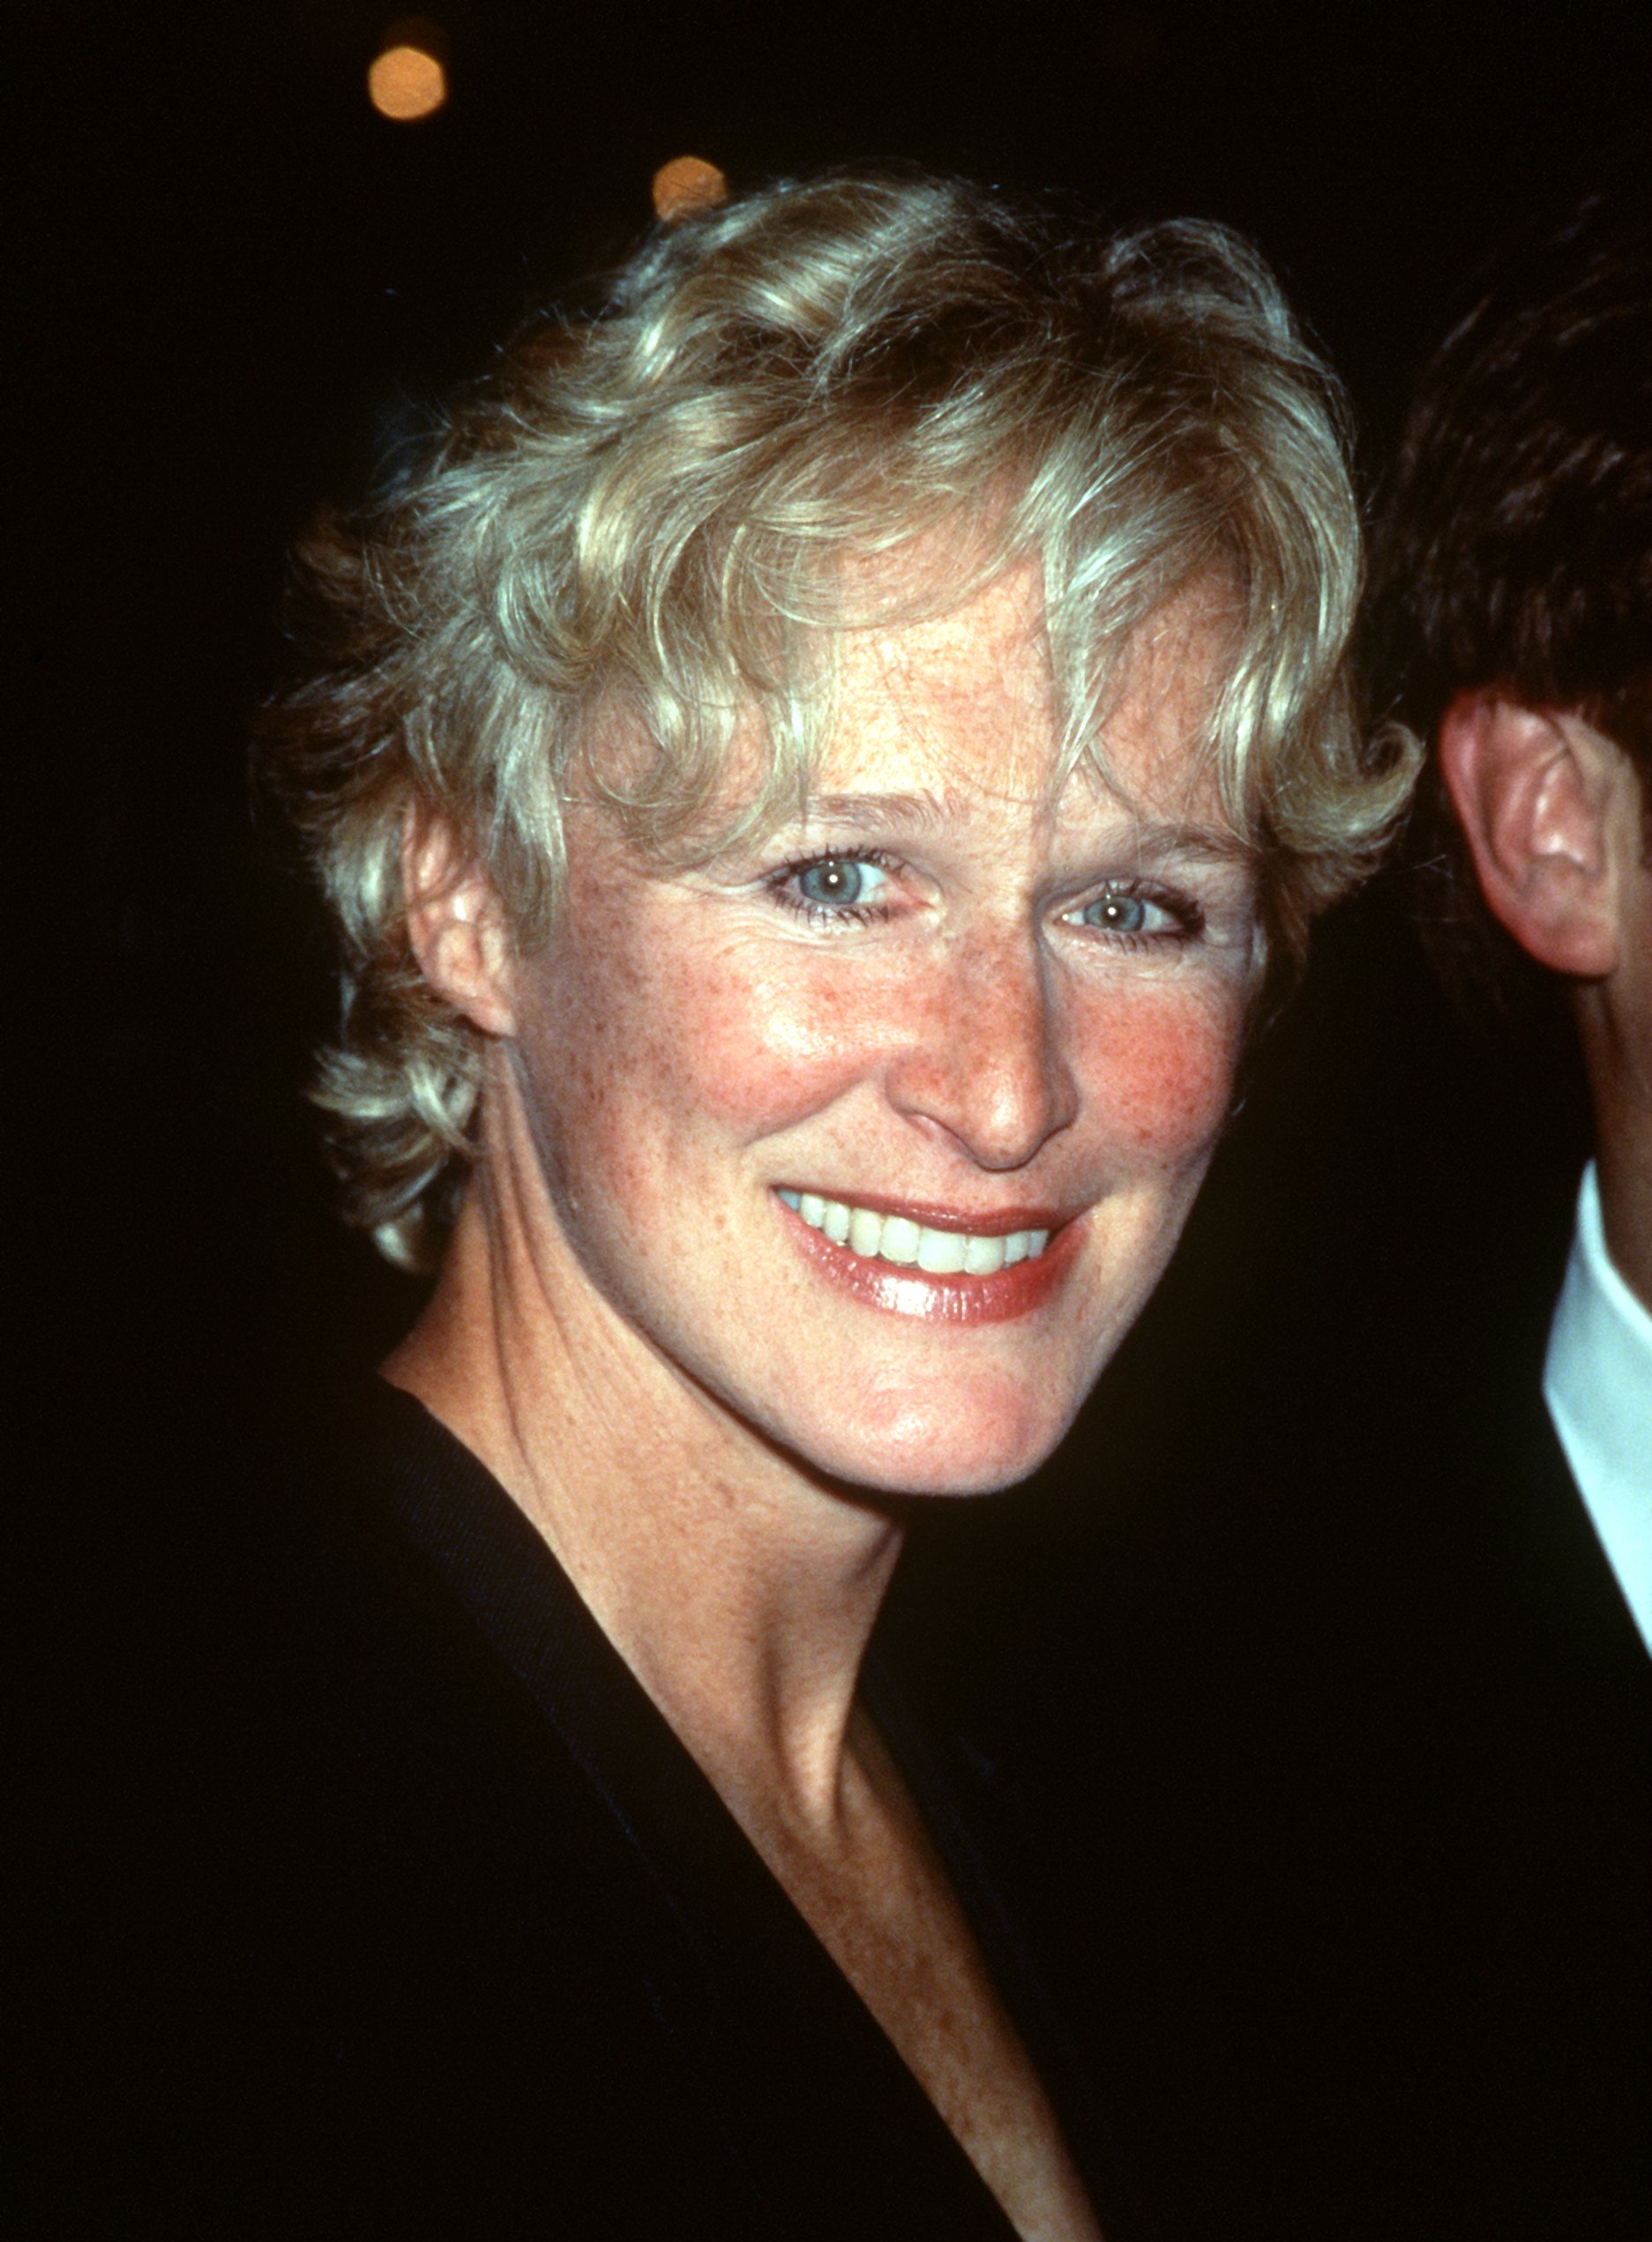 Glenn Close Image HD Wallpaper And Background Photos